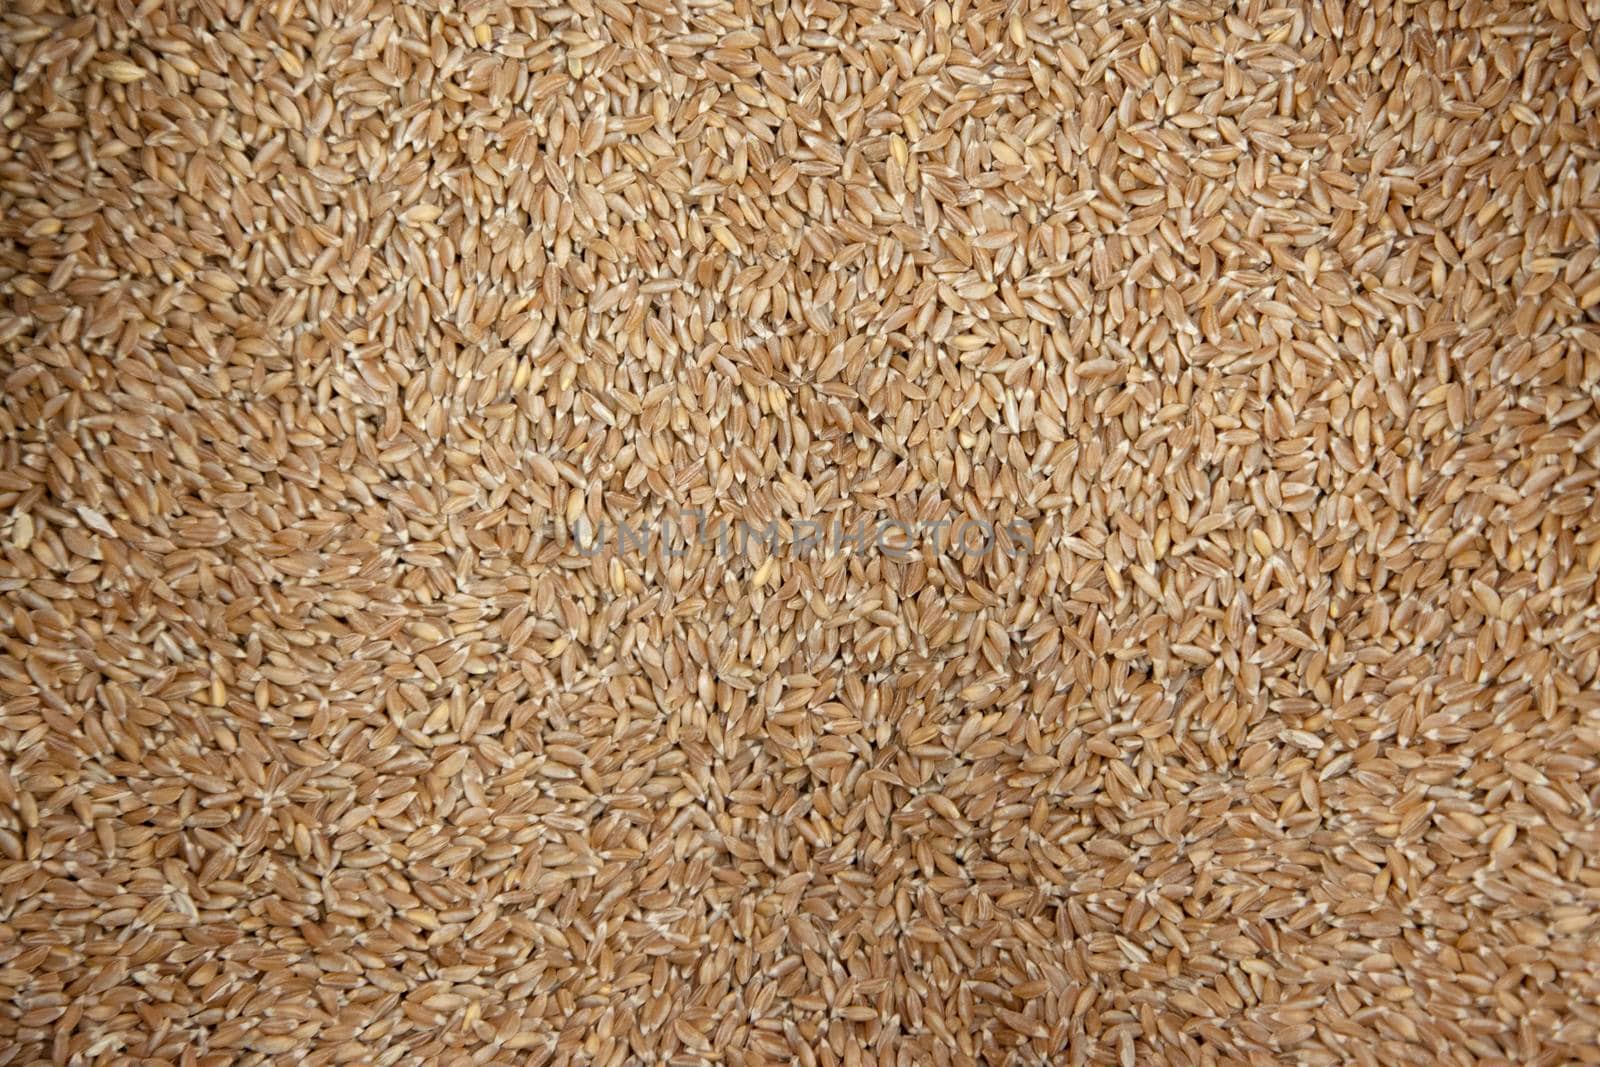 brown hulled wheat, commonly known as farro 